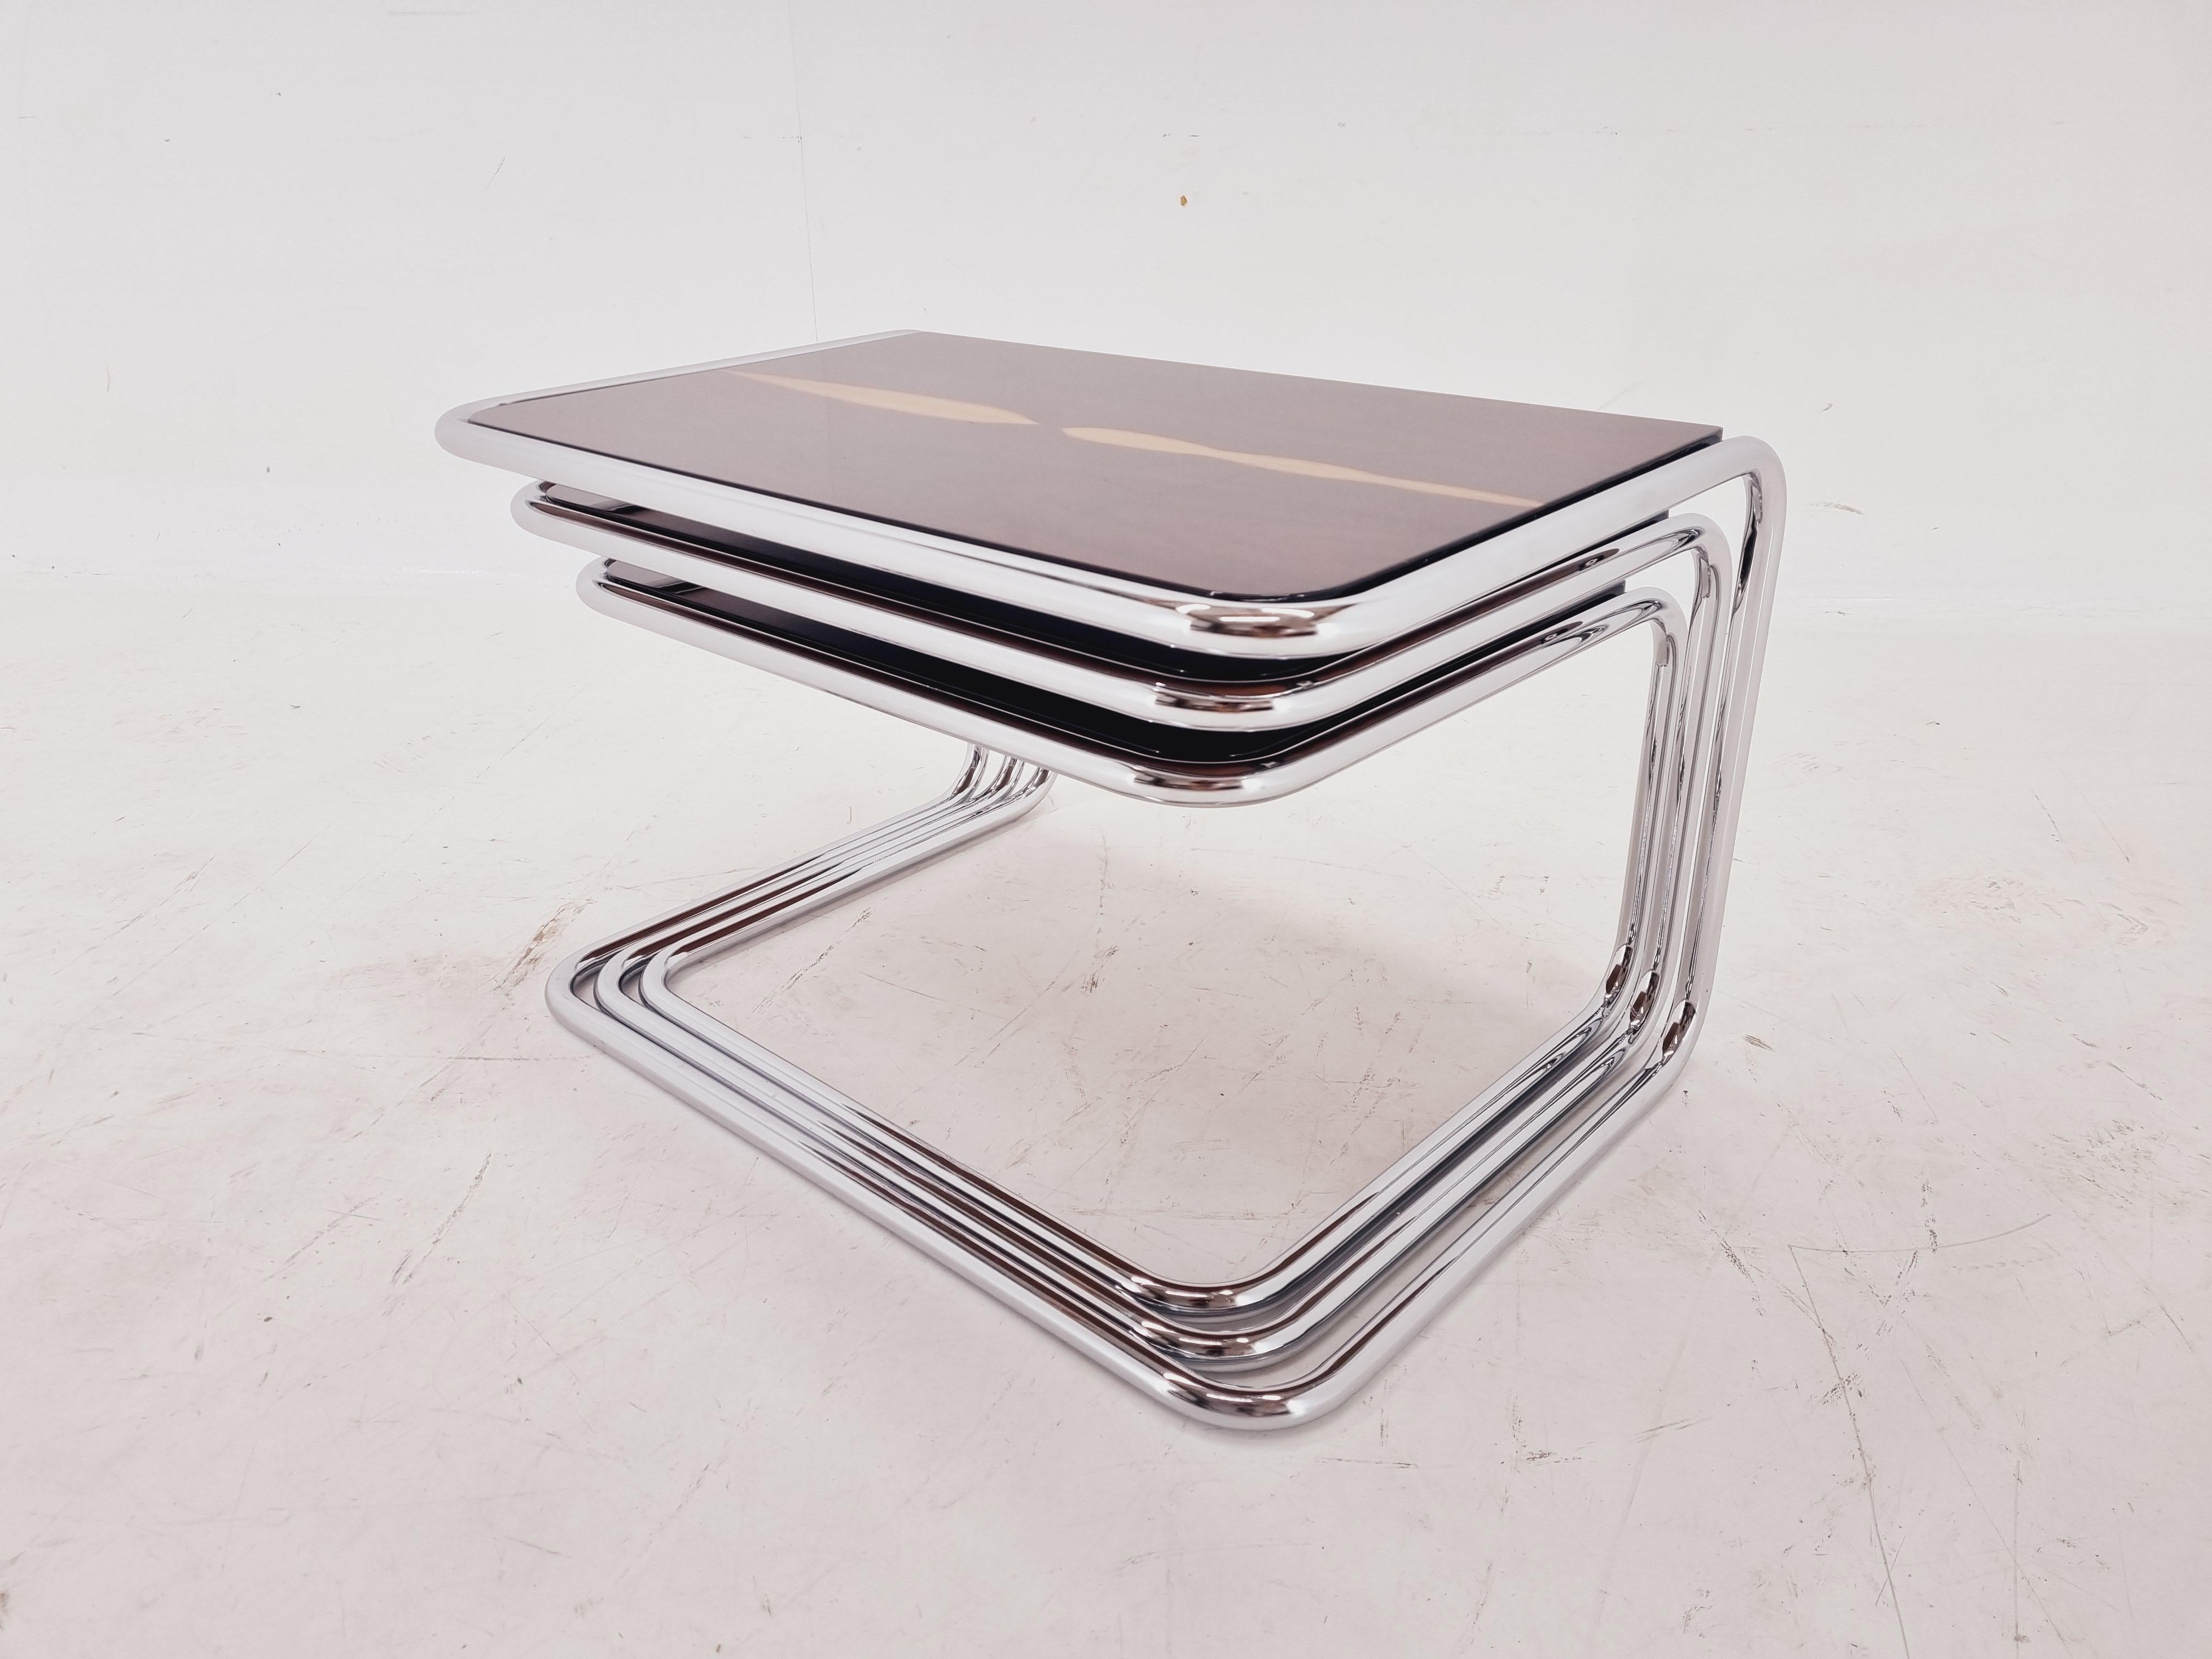 Exclusive Rare Midcentury Nesting Tables, Cocobolo Palisandr and Chrome, 1950s. For Sale 4